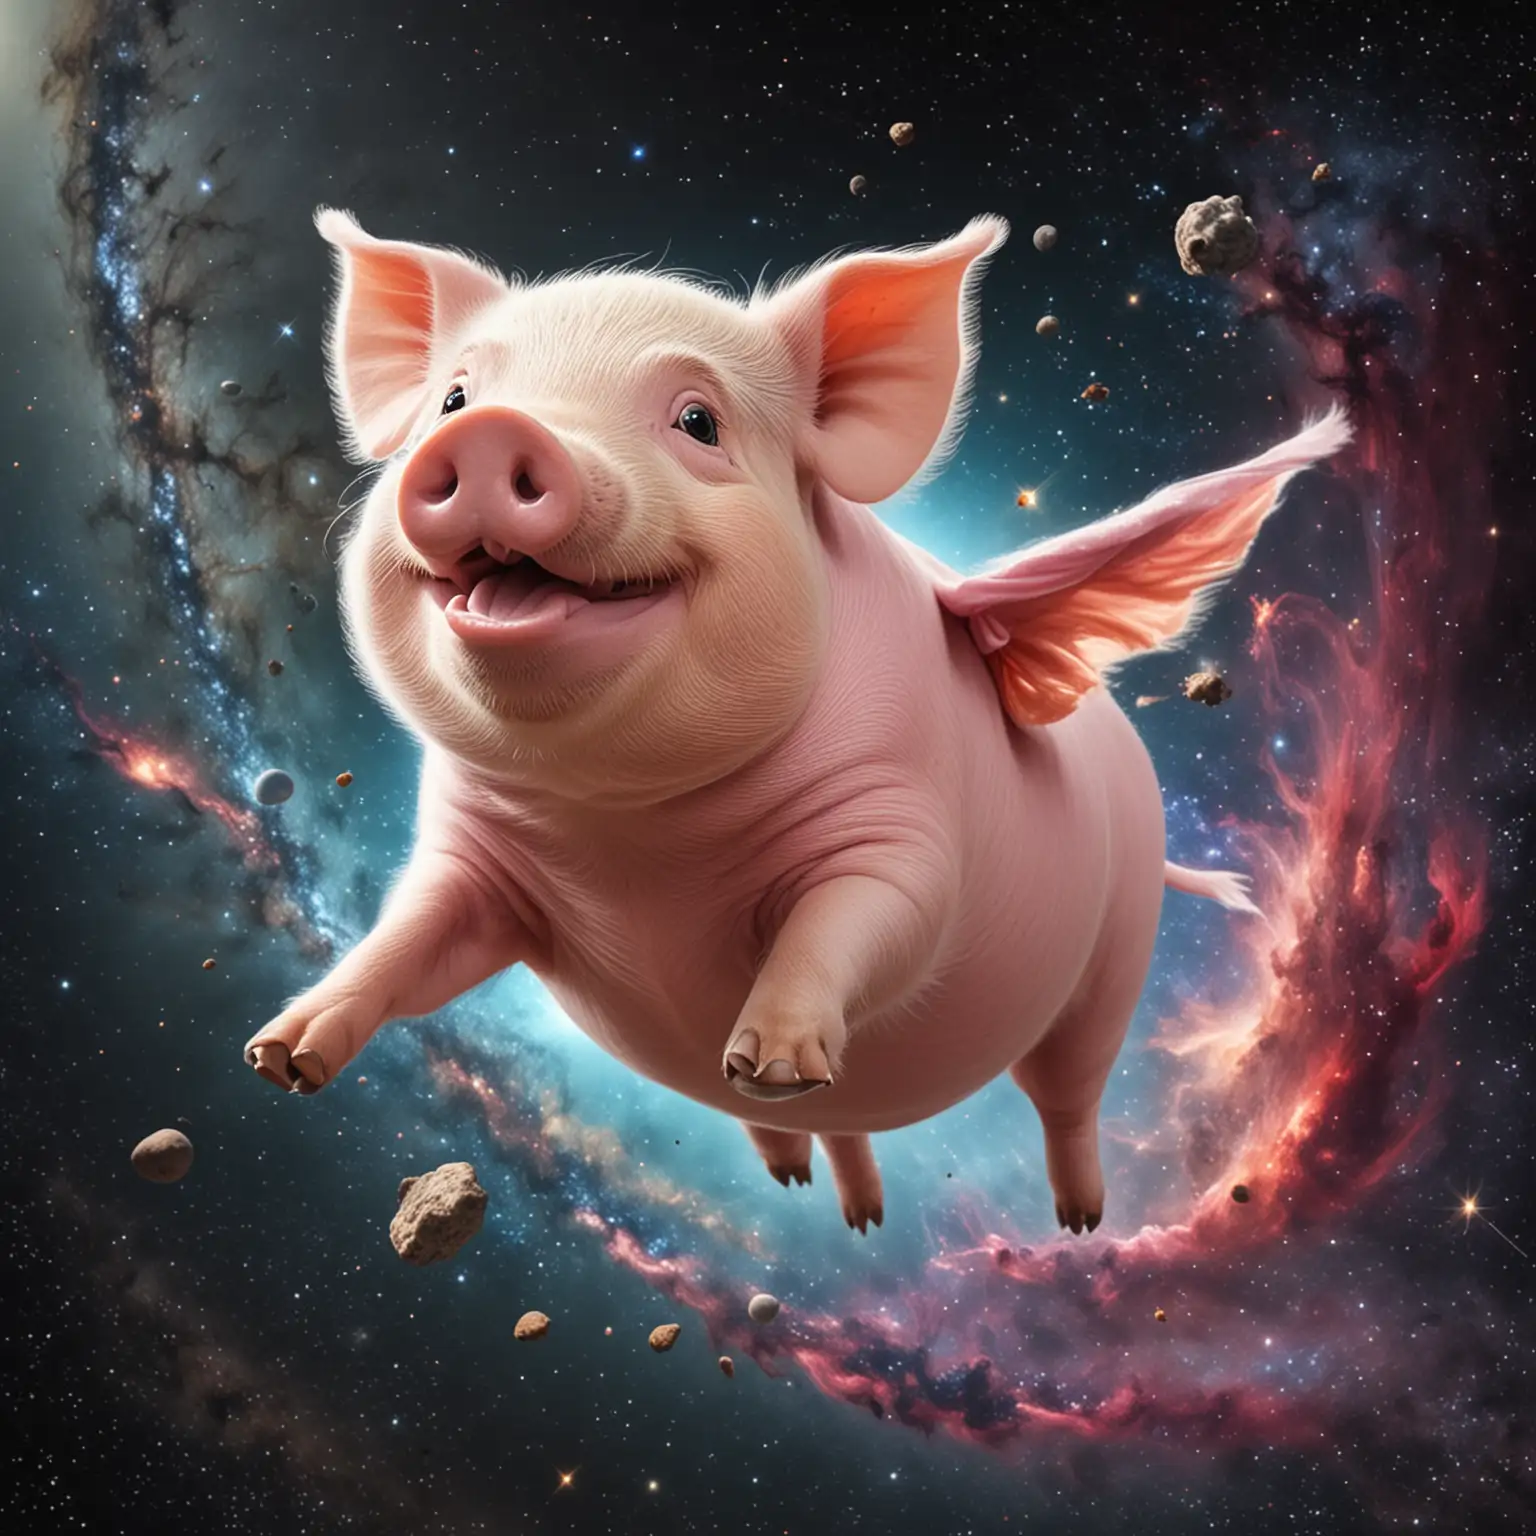 Smiling Pig Flying Through Space with Propelled Buttocks